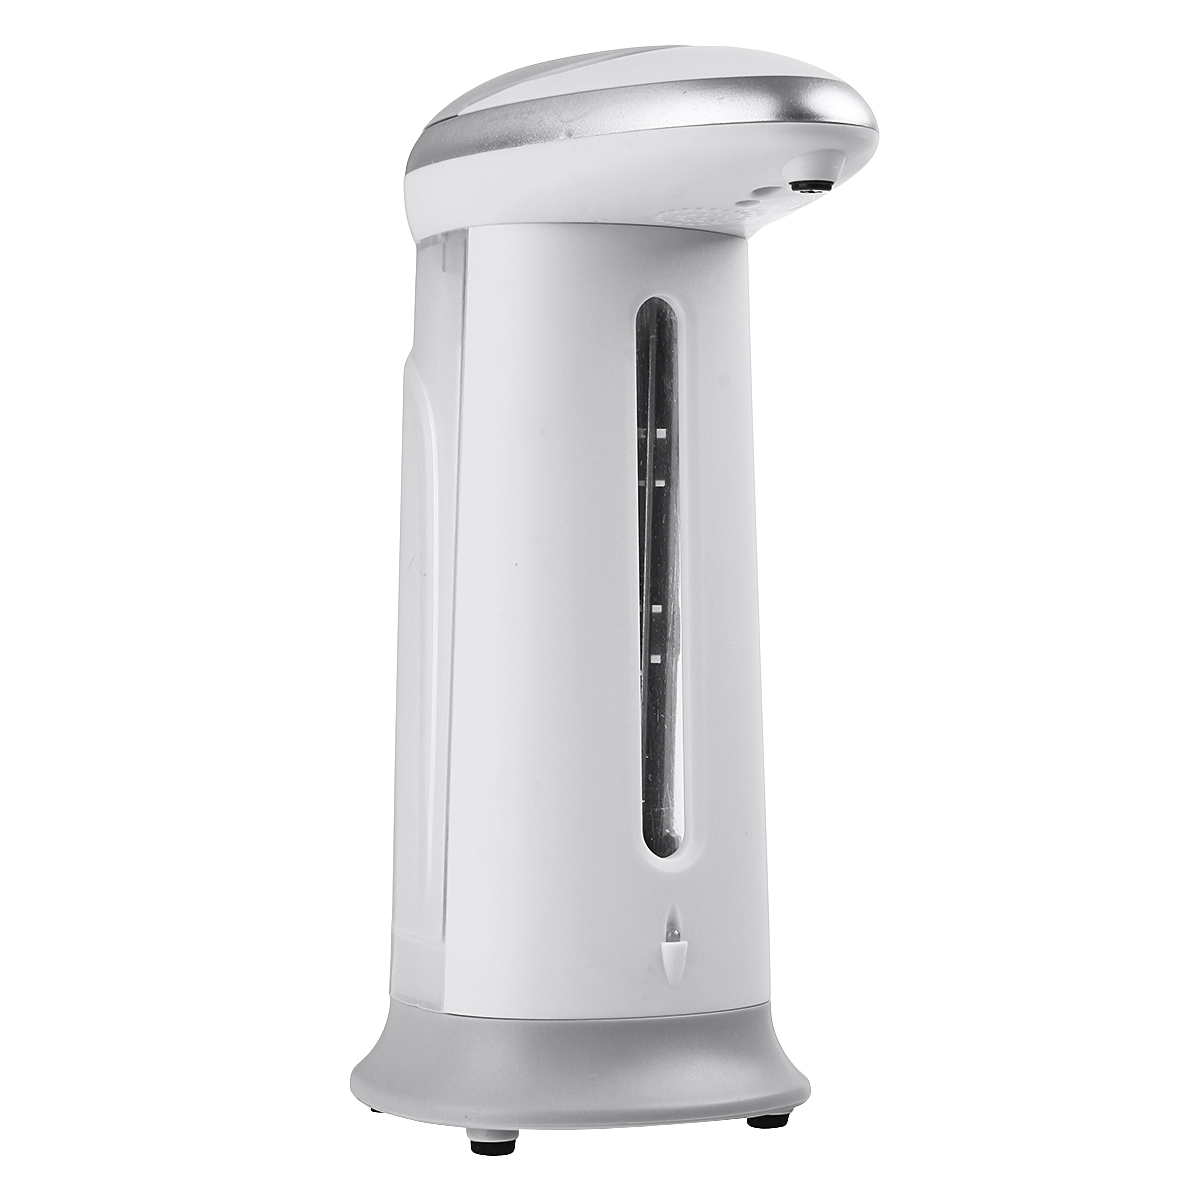 Soap-Dispenser-Automatic-Lotion-Dispenser-Infrared-Sensor-Automatic-No-Touch-1690580-5